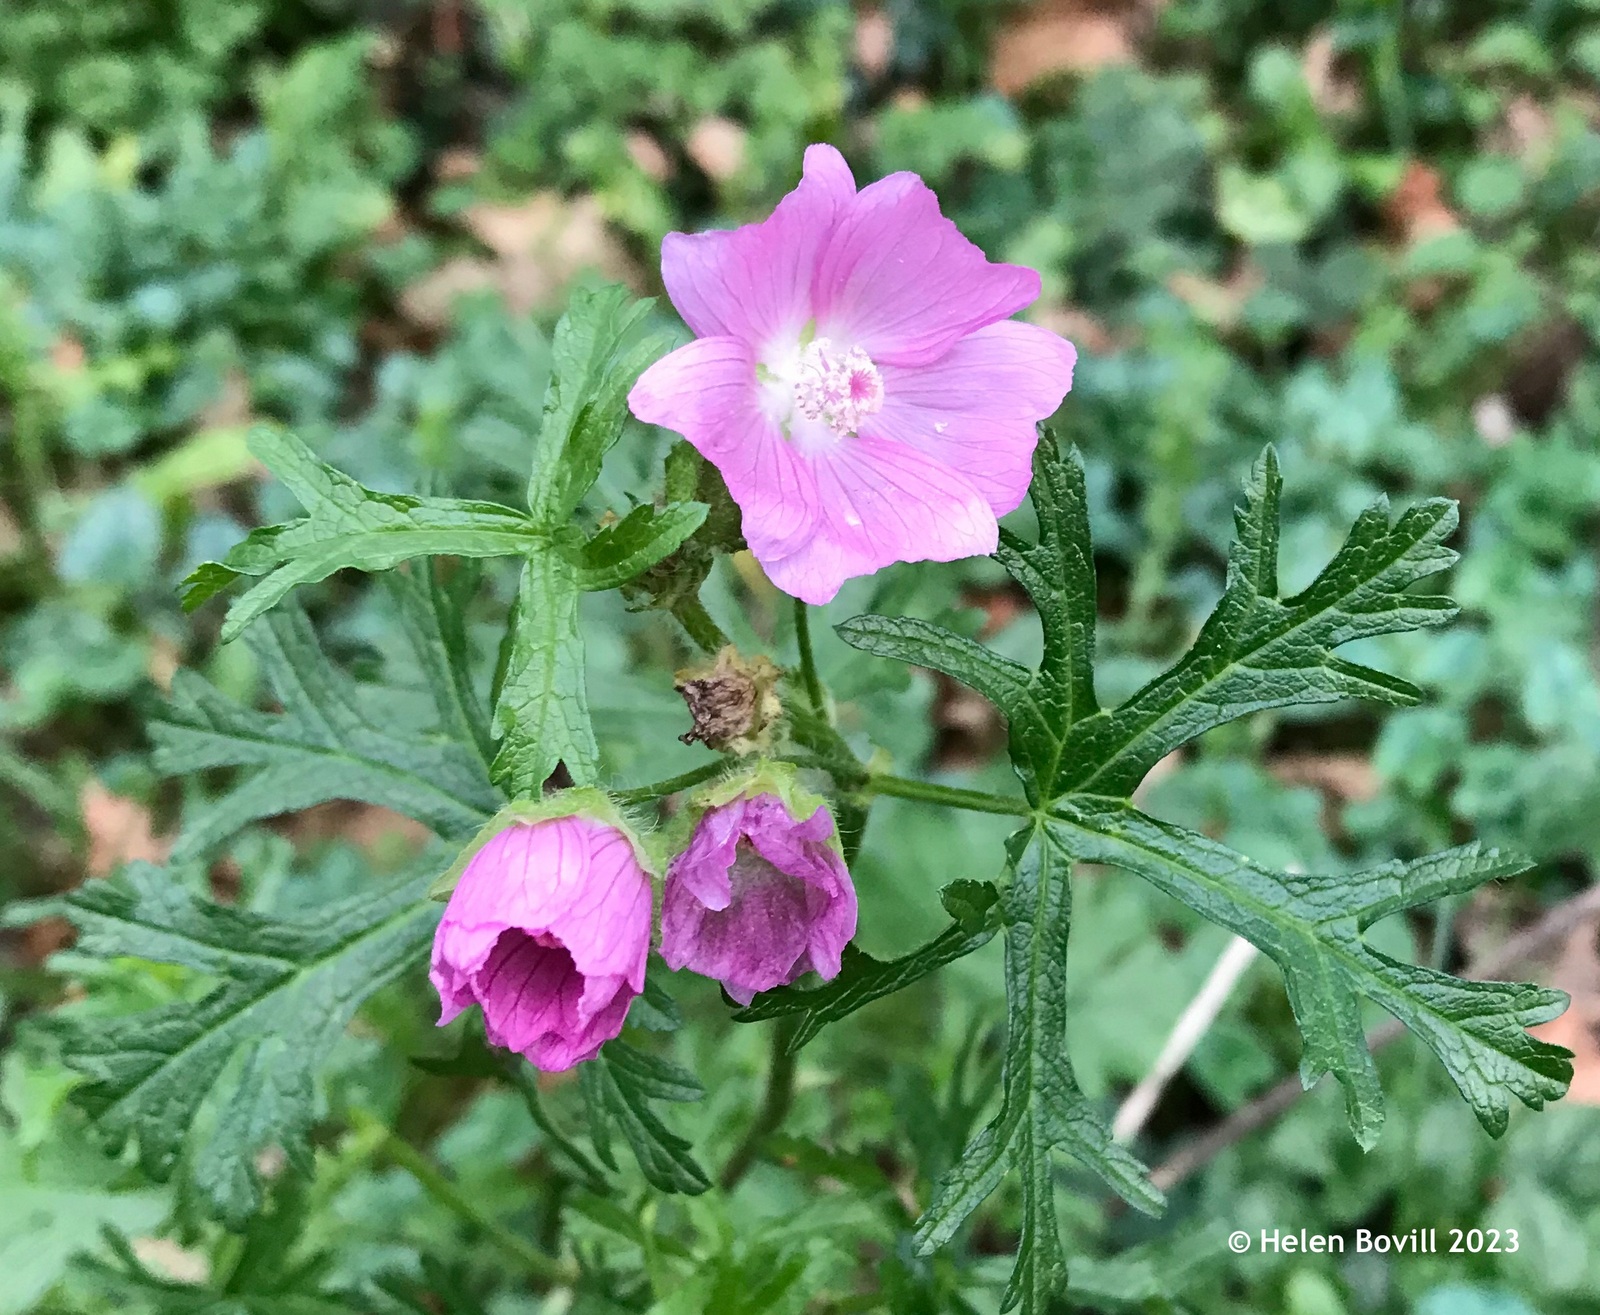 The pink flowers of the Musk Mallow